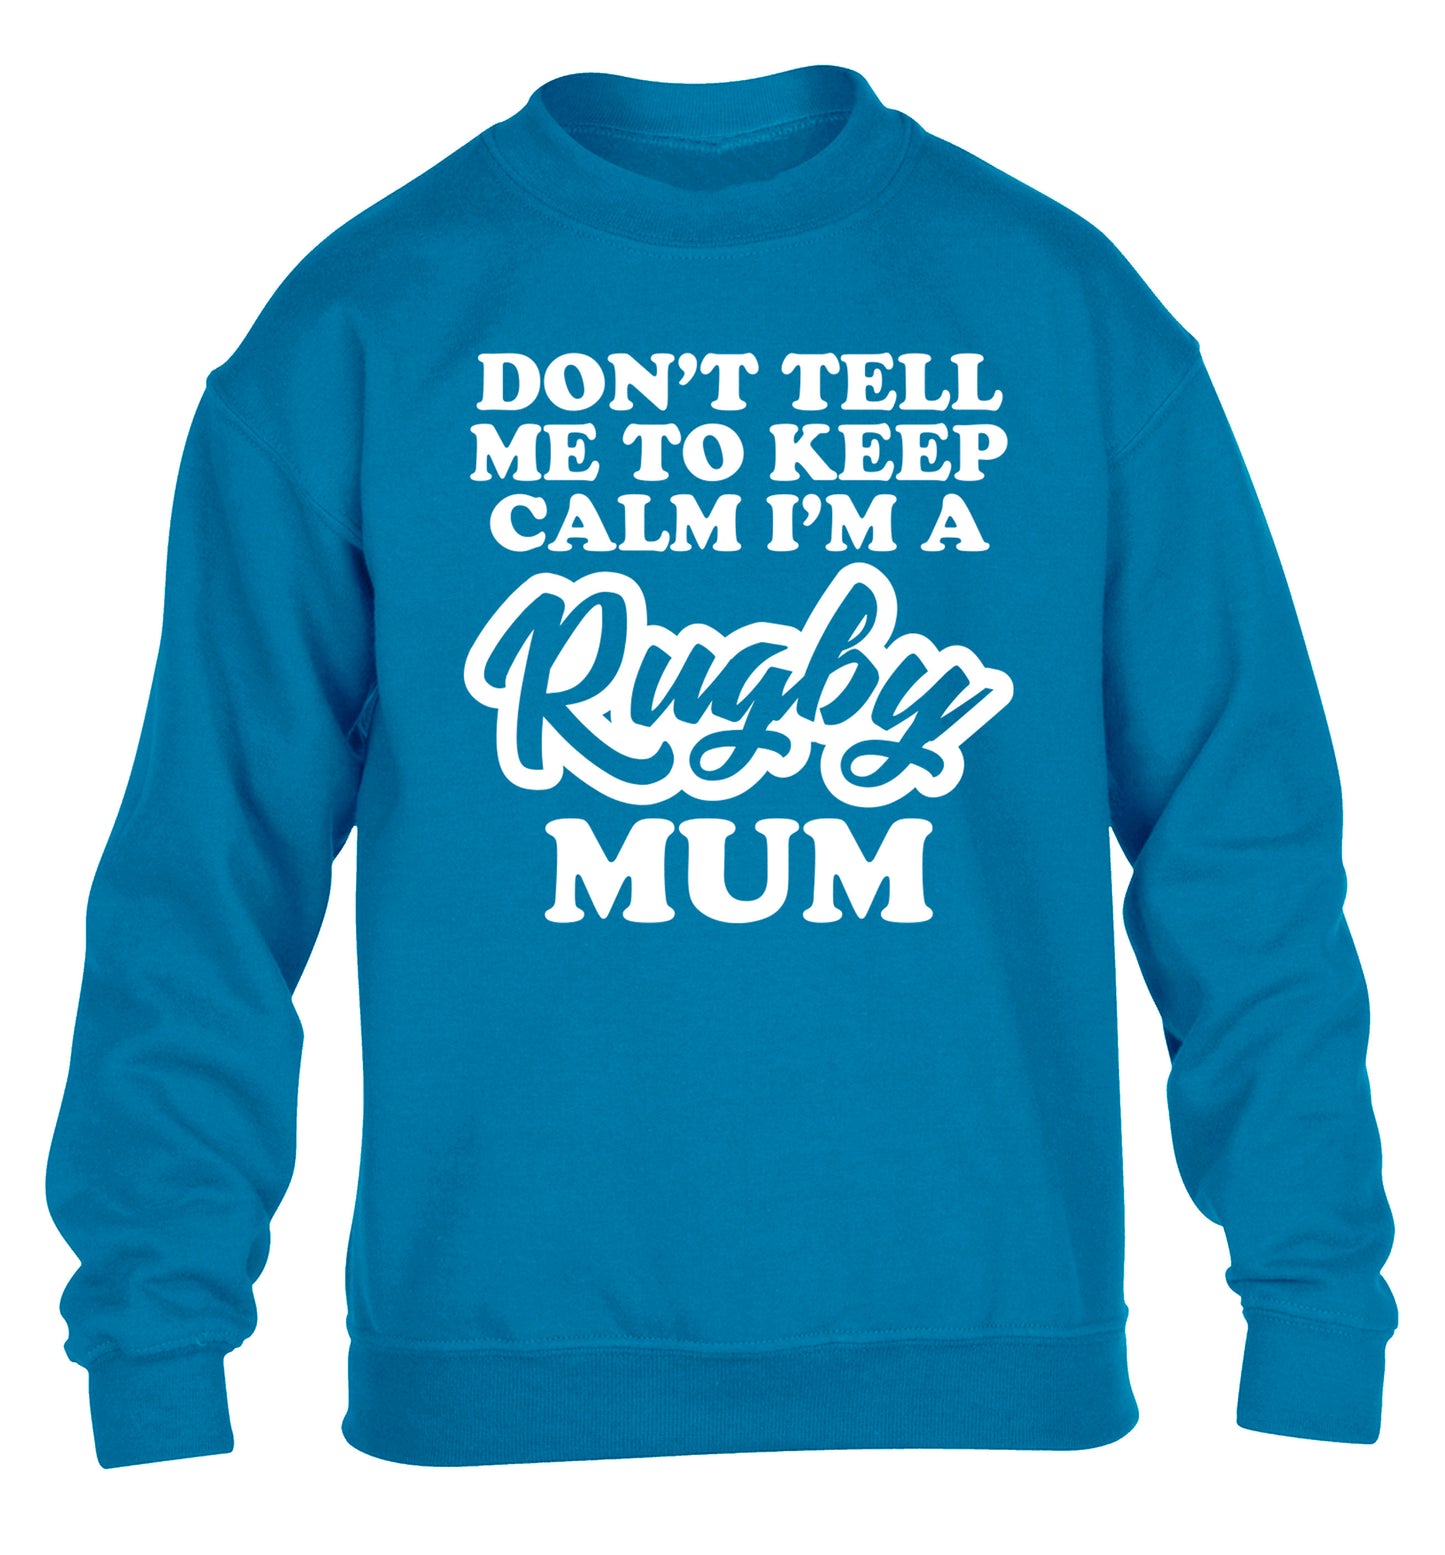 Don't tell me to keep calm I'm a rugby mum children's blue sweater 12-13 Years